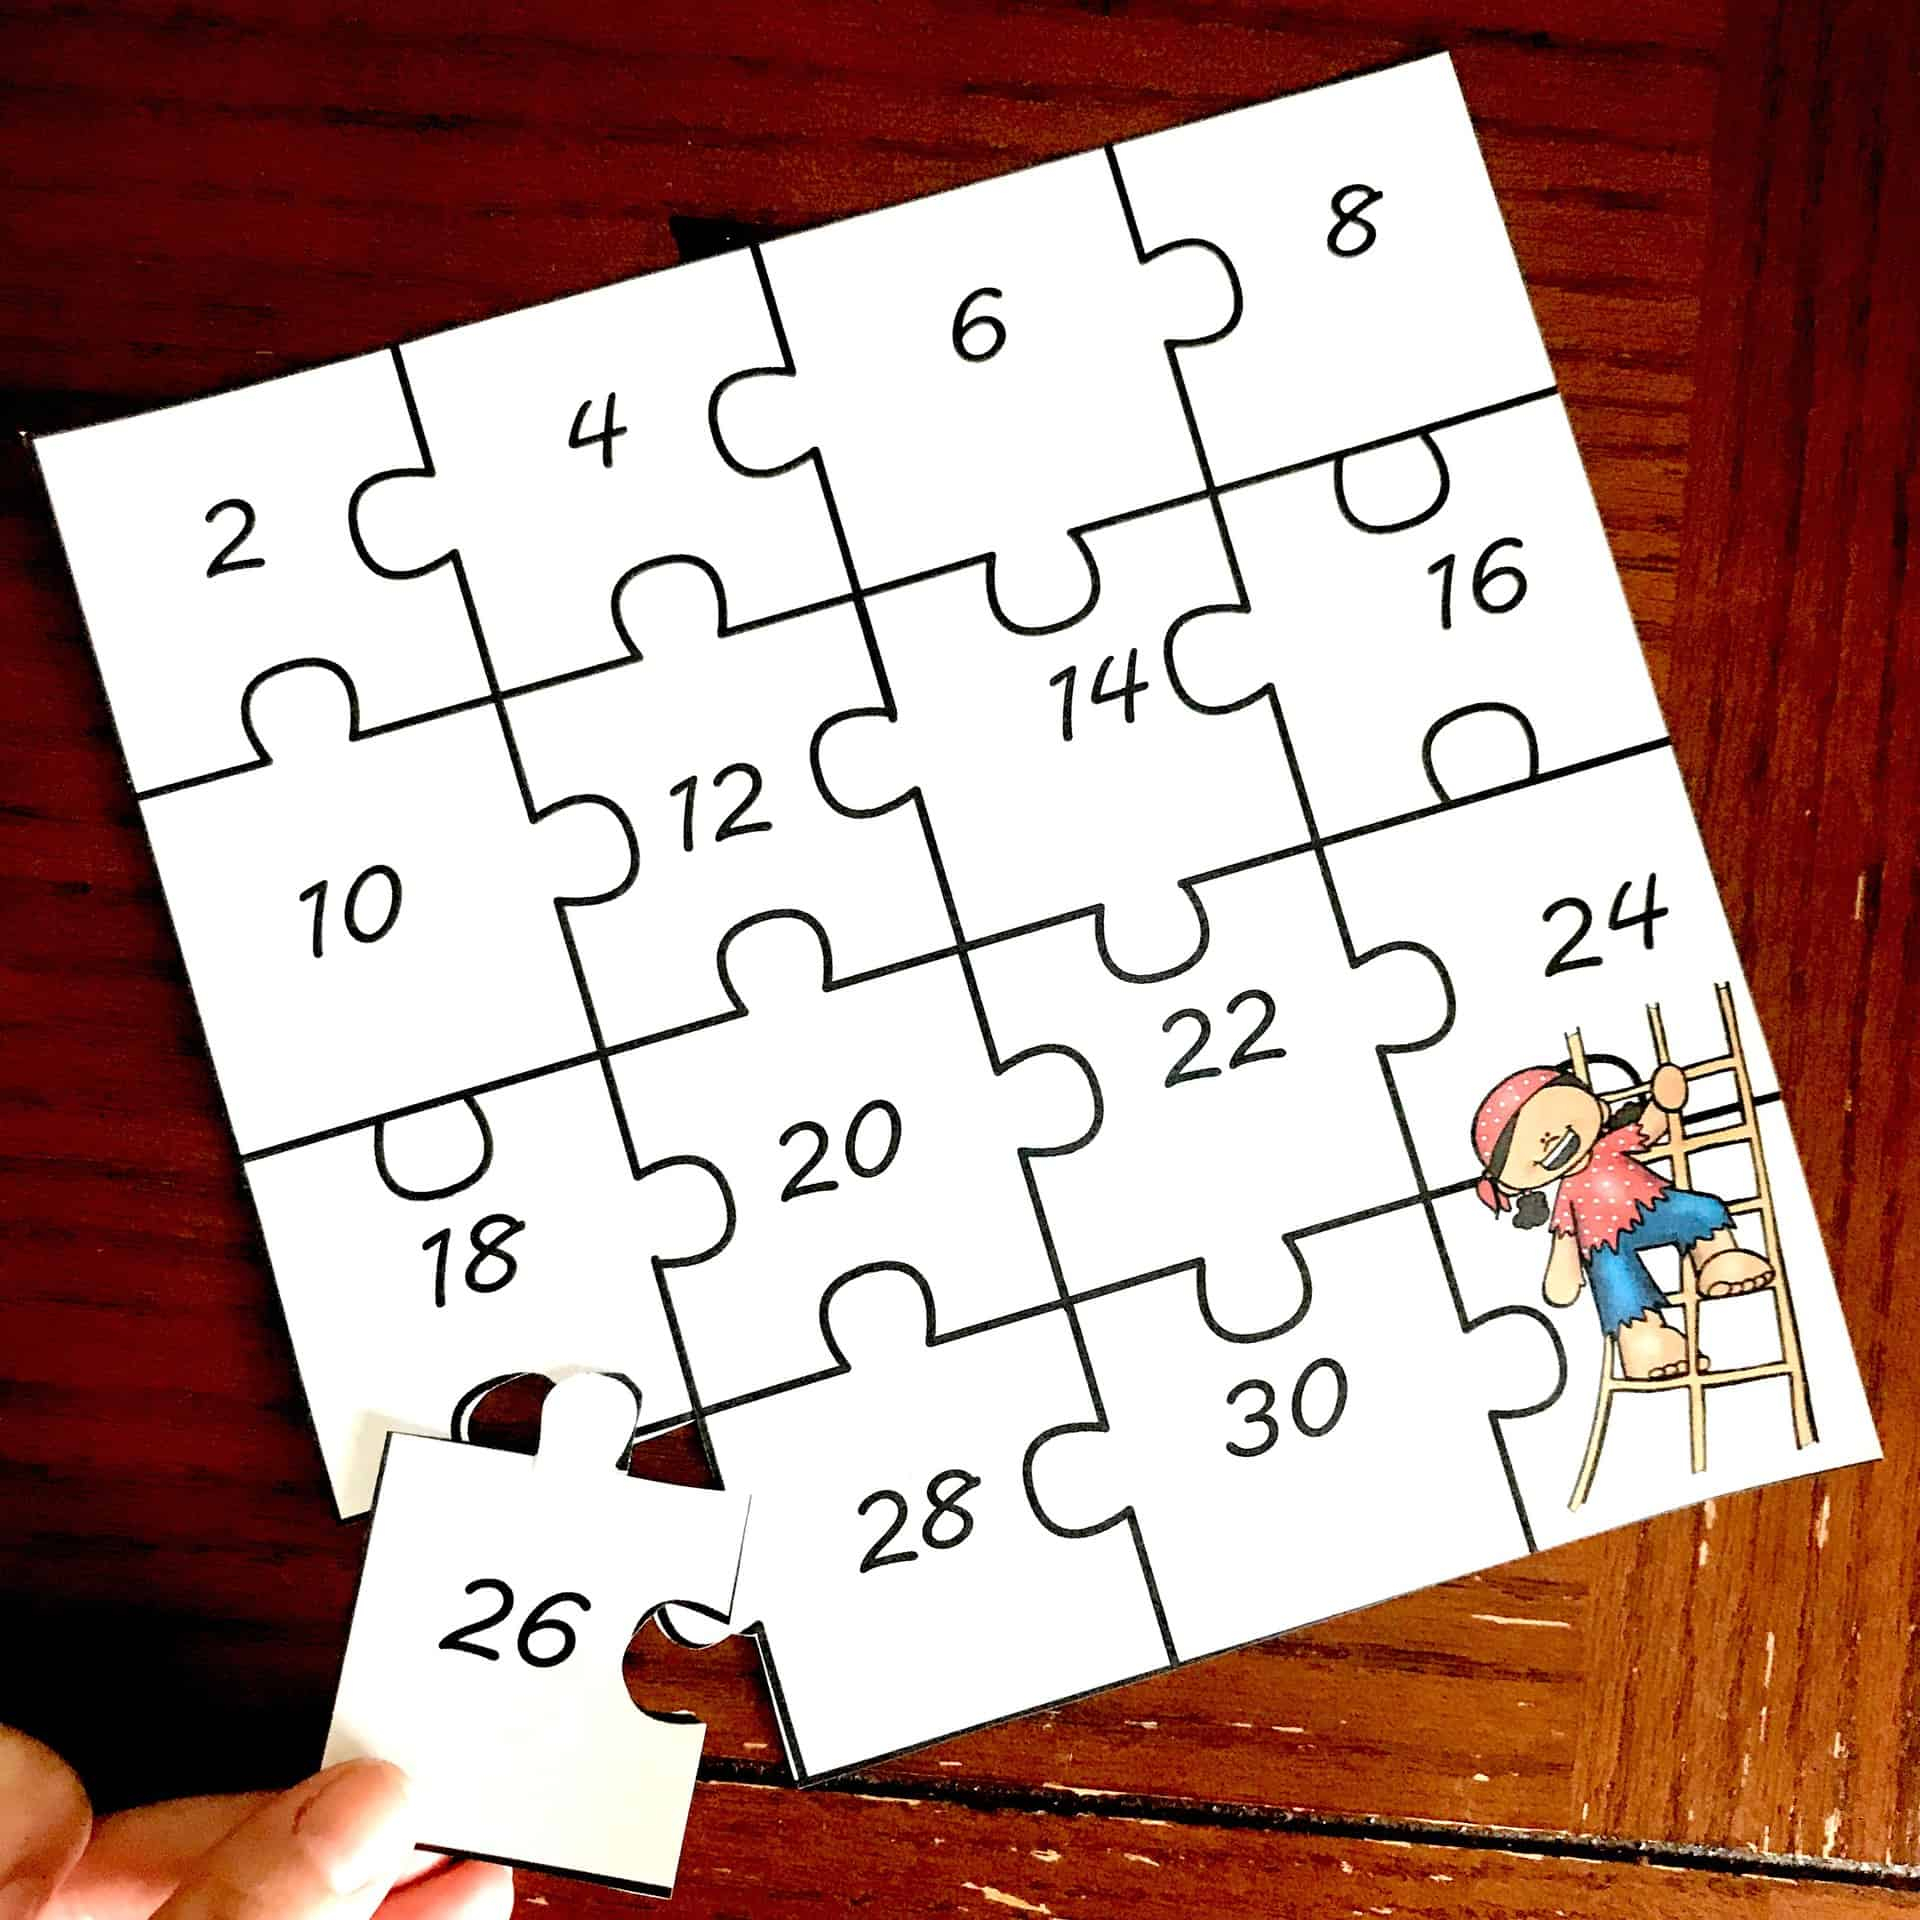 15 Skip Counting Puzzles To Build Schema For Multiplication Facts